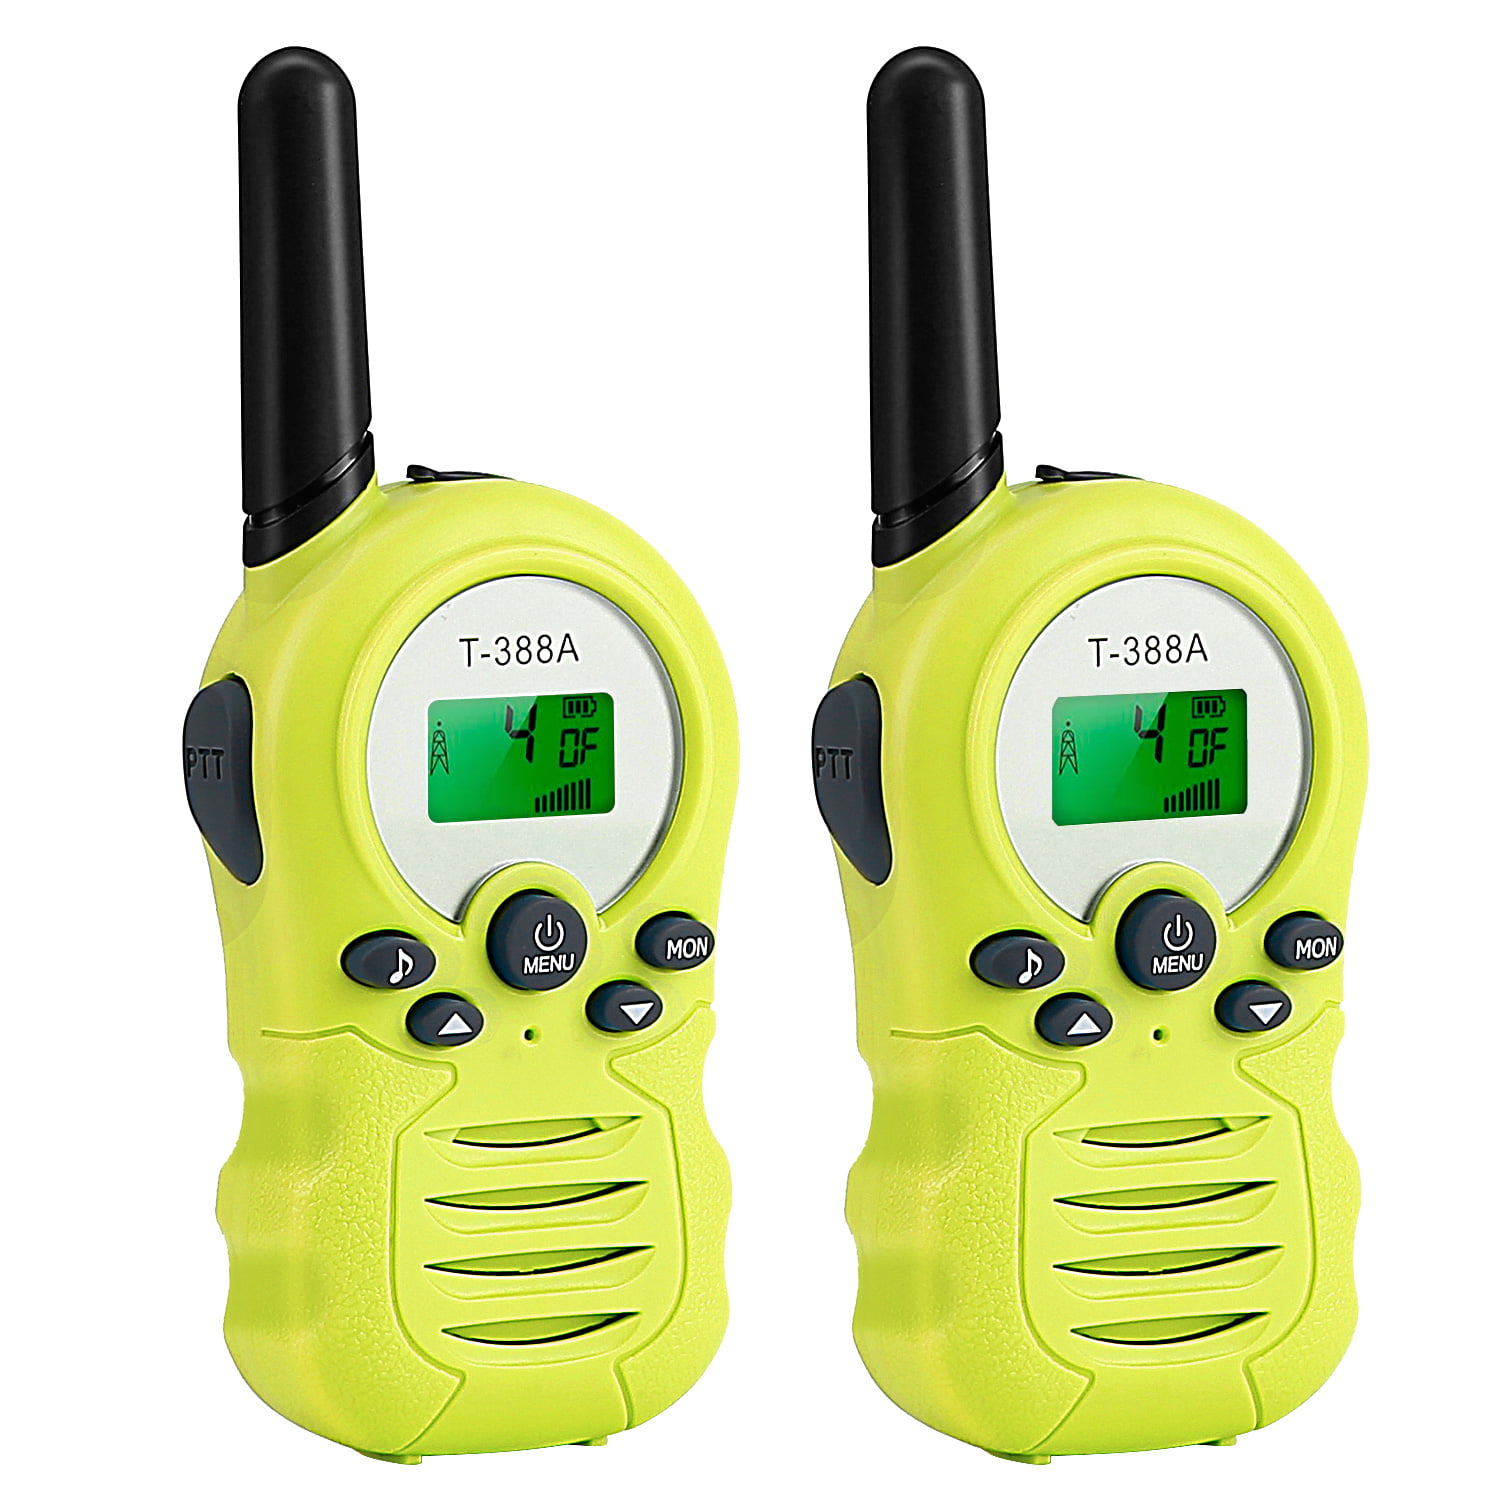 Pair Discover Boys Built in Flash Light Toys Talkie Long Range 2 Way Walky Talky Radios Girls Red Childrens Costume 22 Channel iCore Walkie Talkies for Kids Rechargeable 